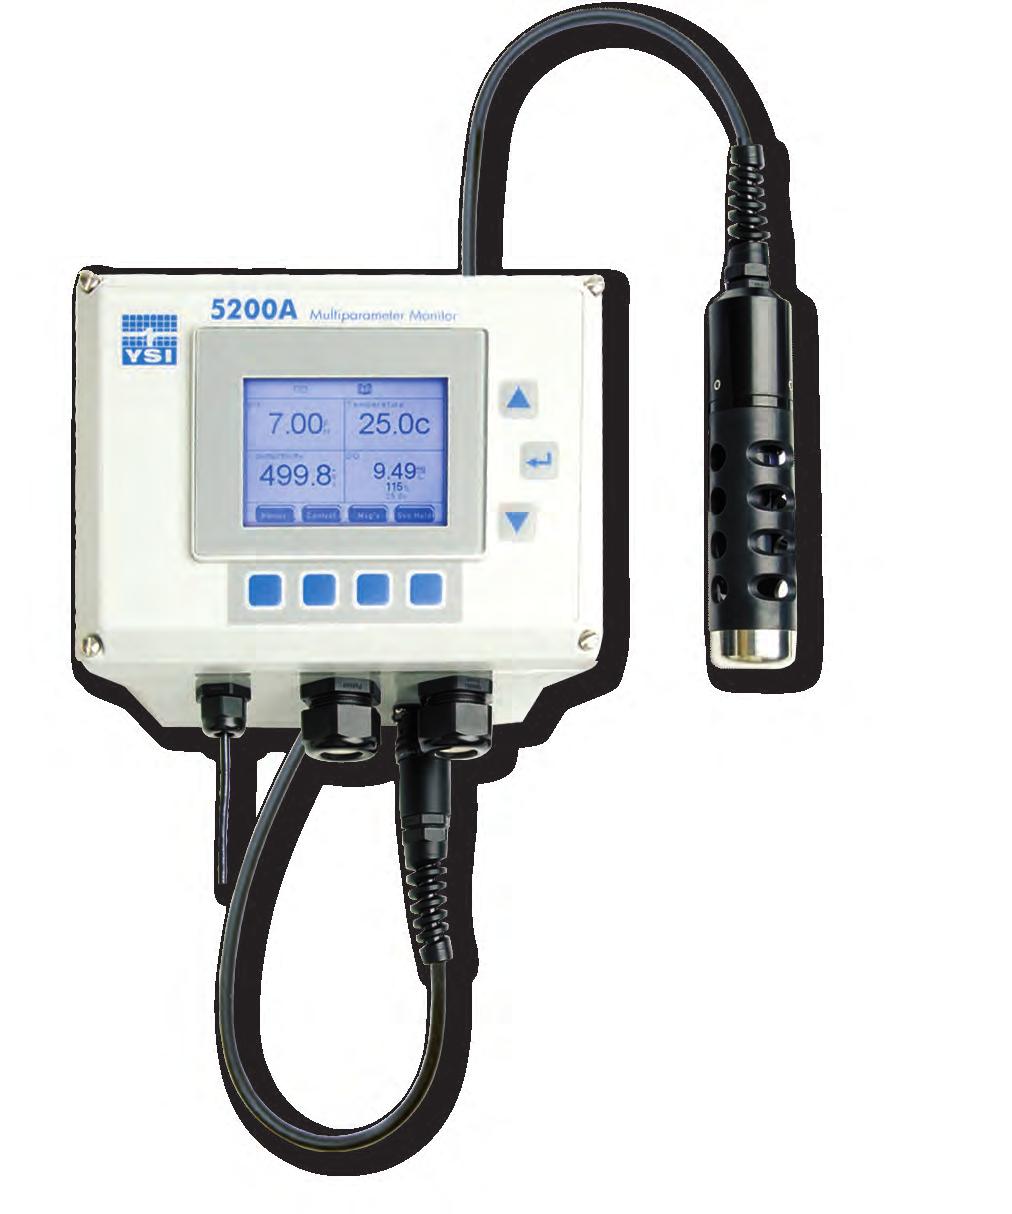 5200A Multiparameter Monitor Designed specifically for aquaculture systems, the 5200A integrates process control, feeding, alarming, and data management into one product.